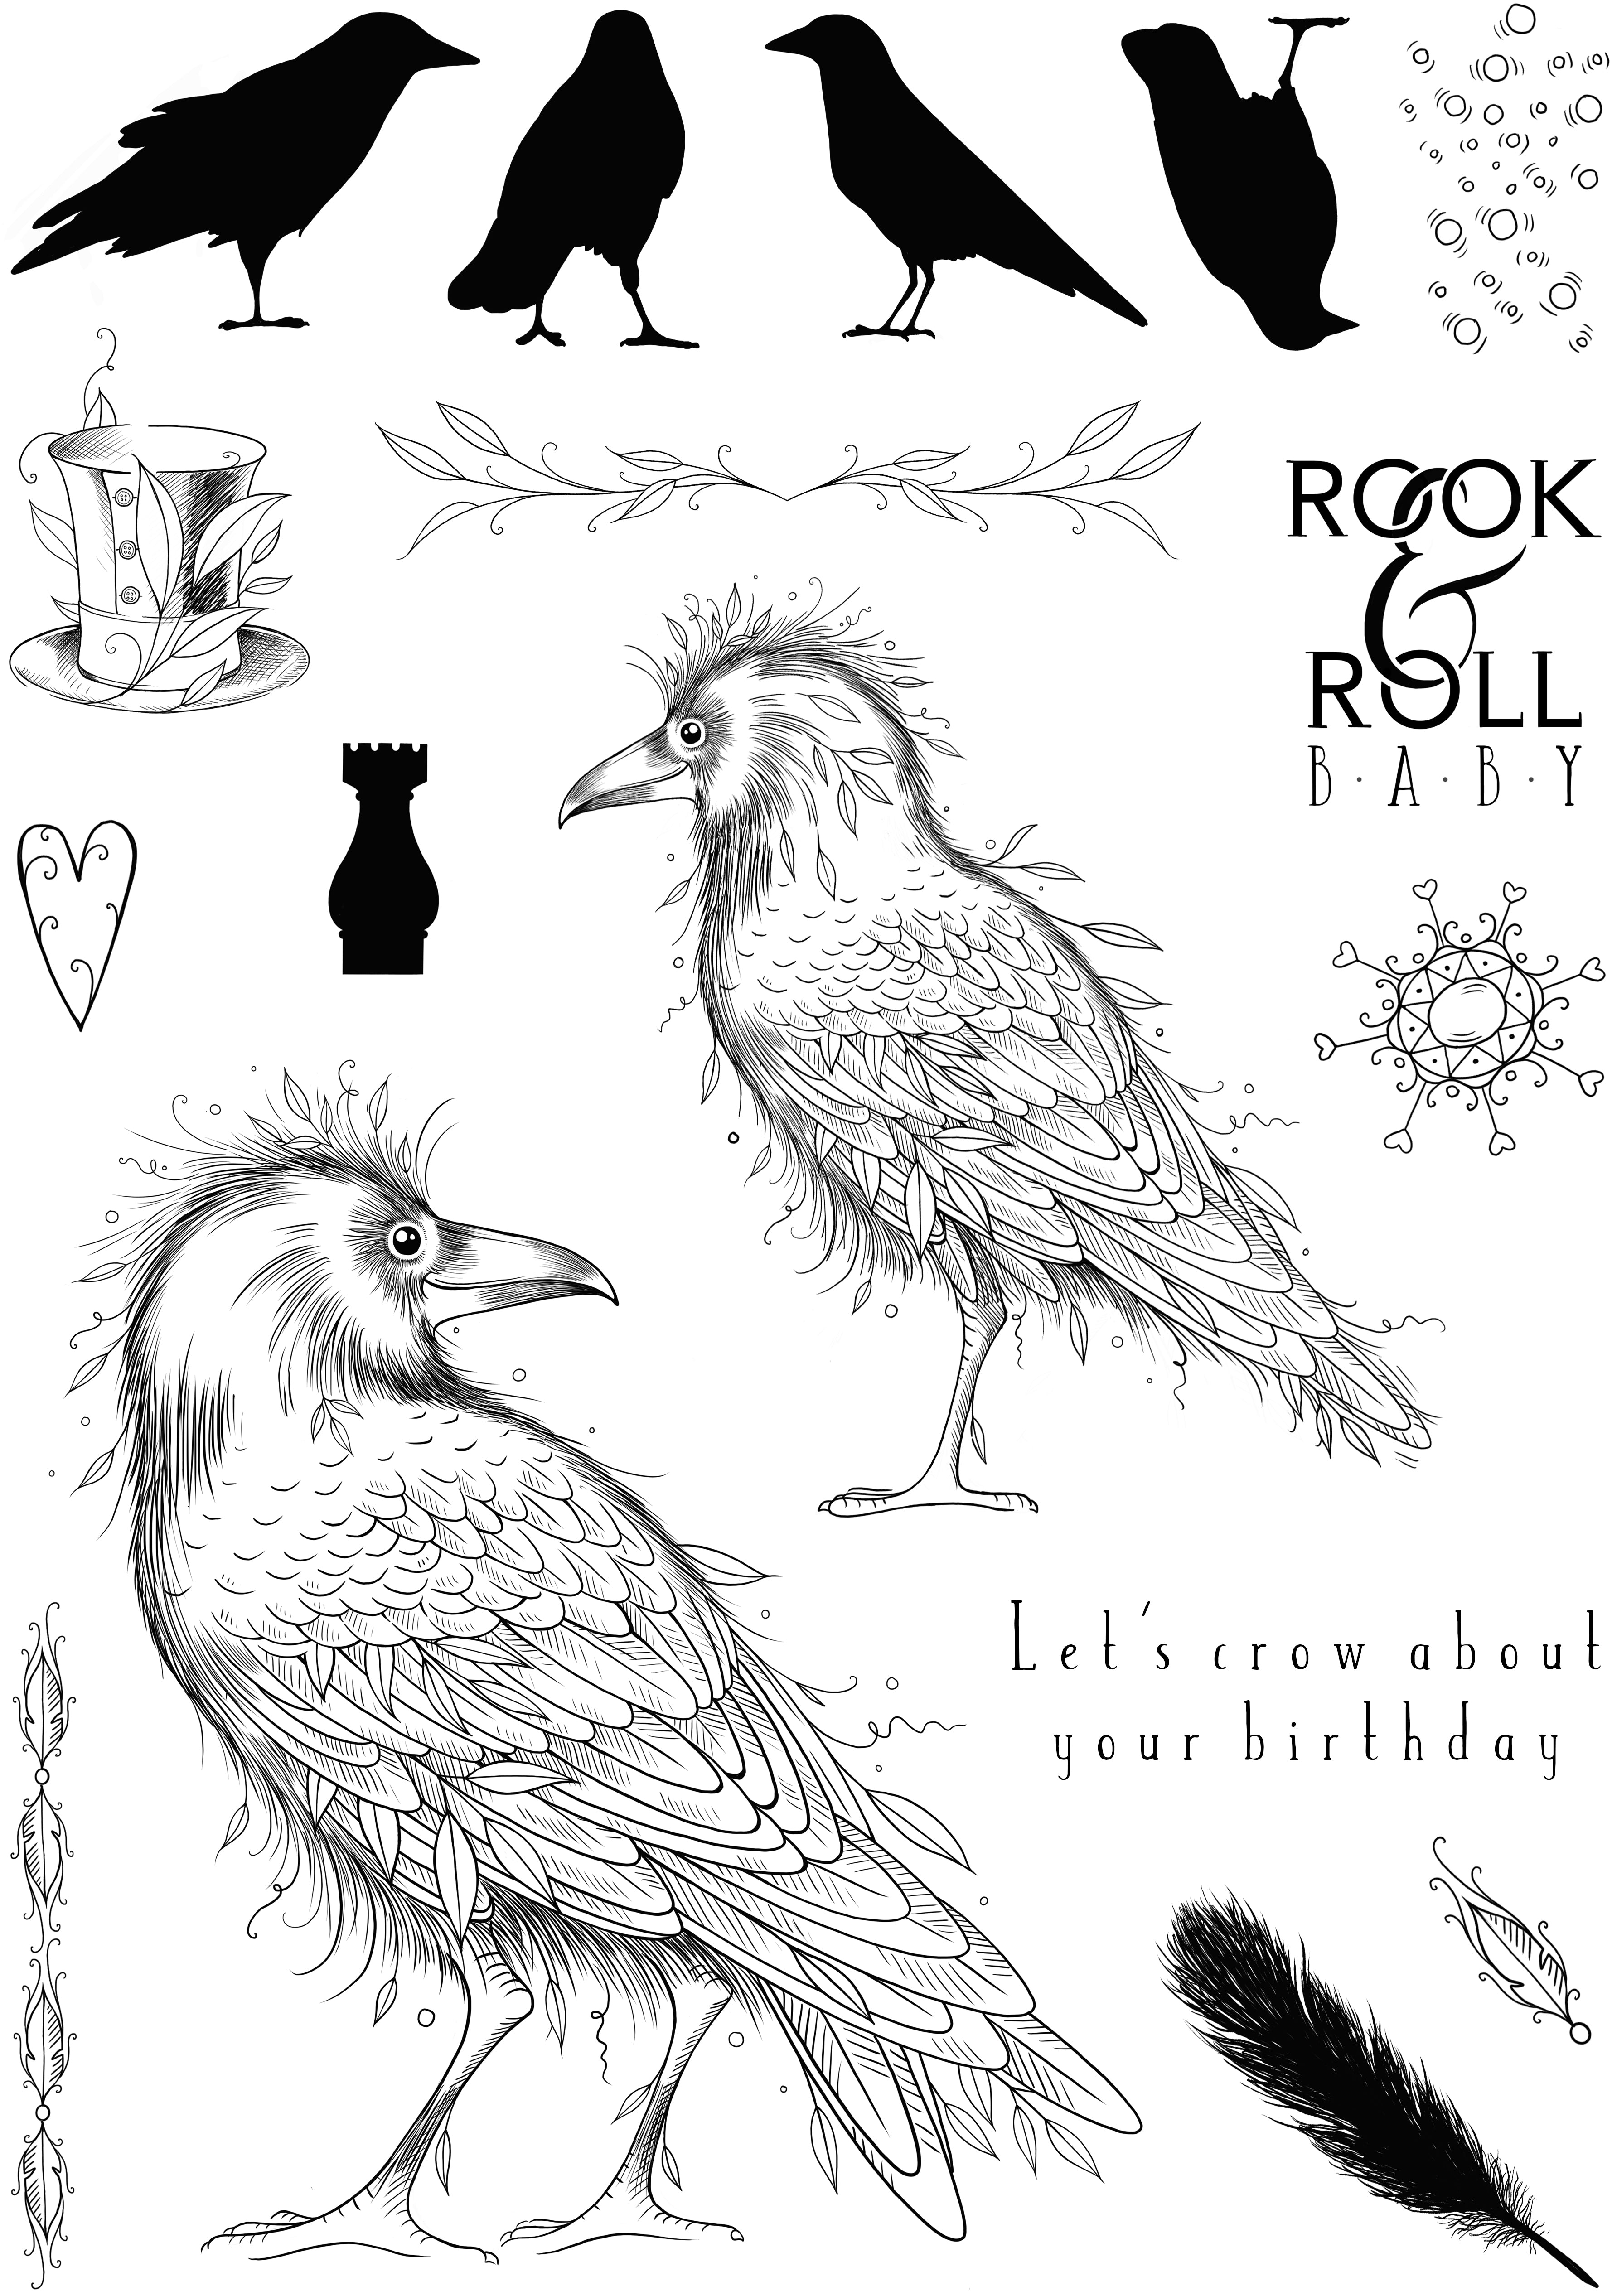 Pink Ink Designs Rook & Roll 6 in x 8 in Clear Stamp Set